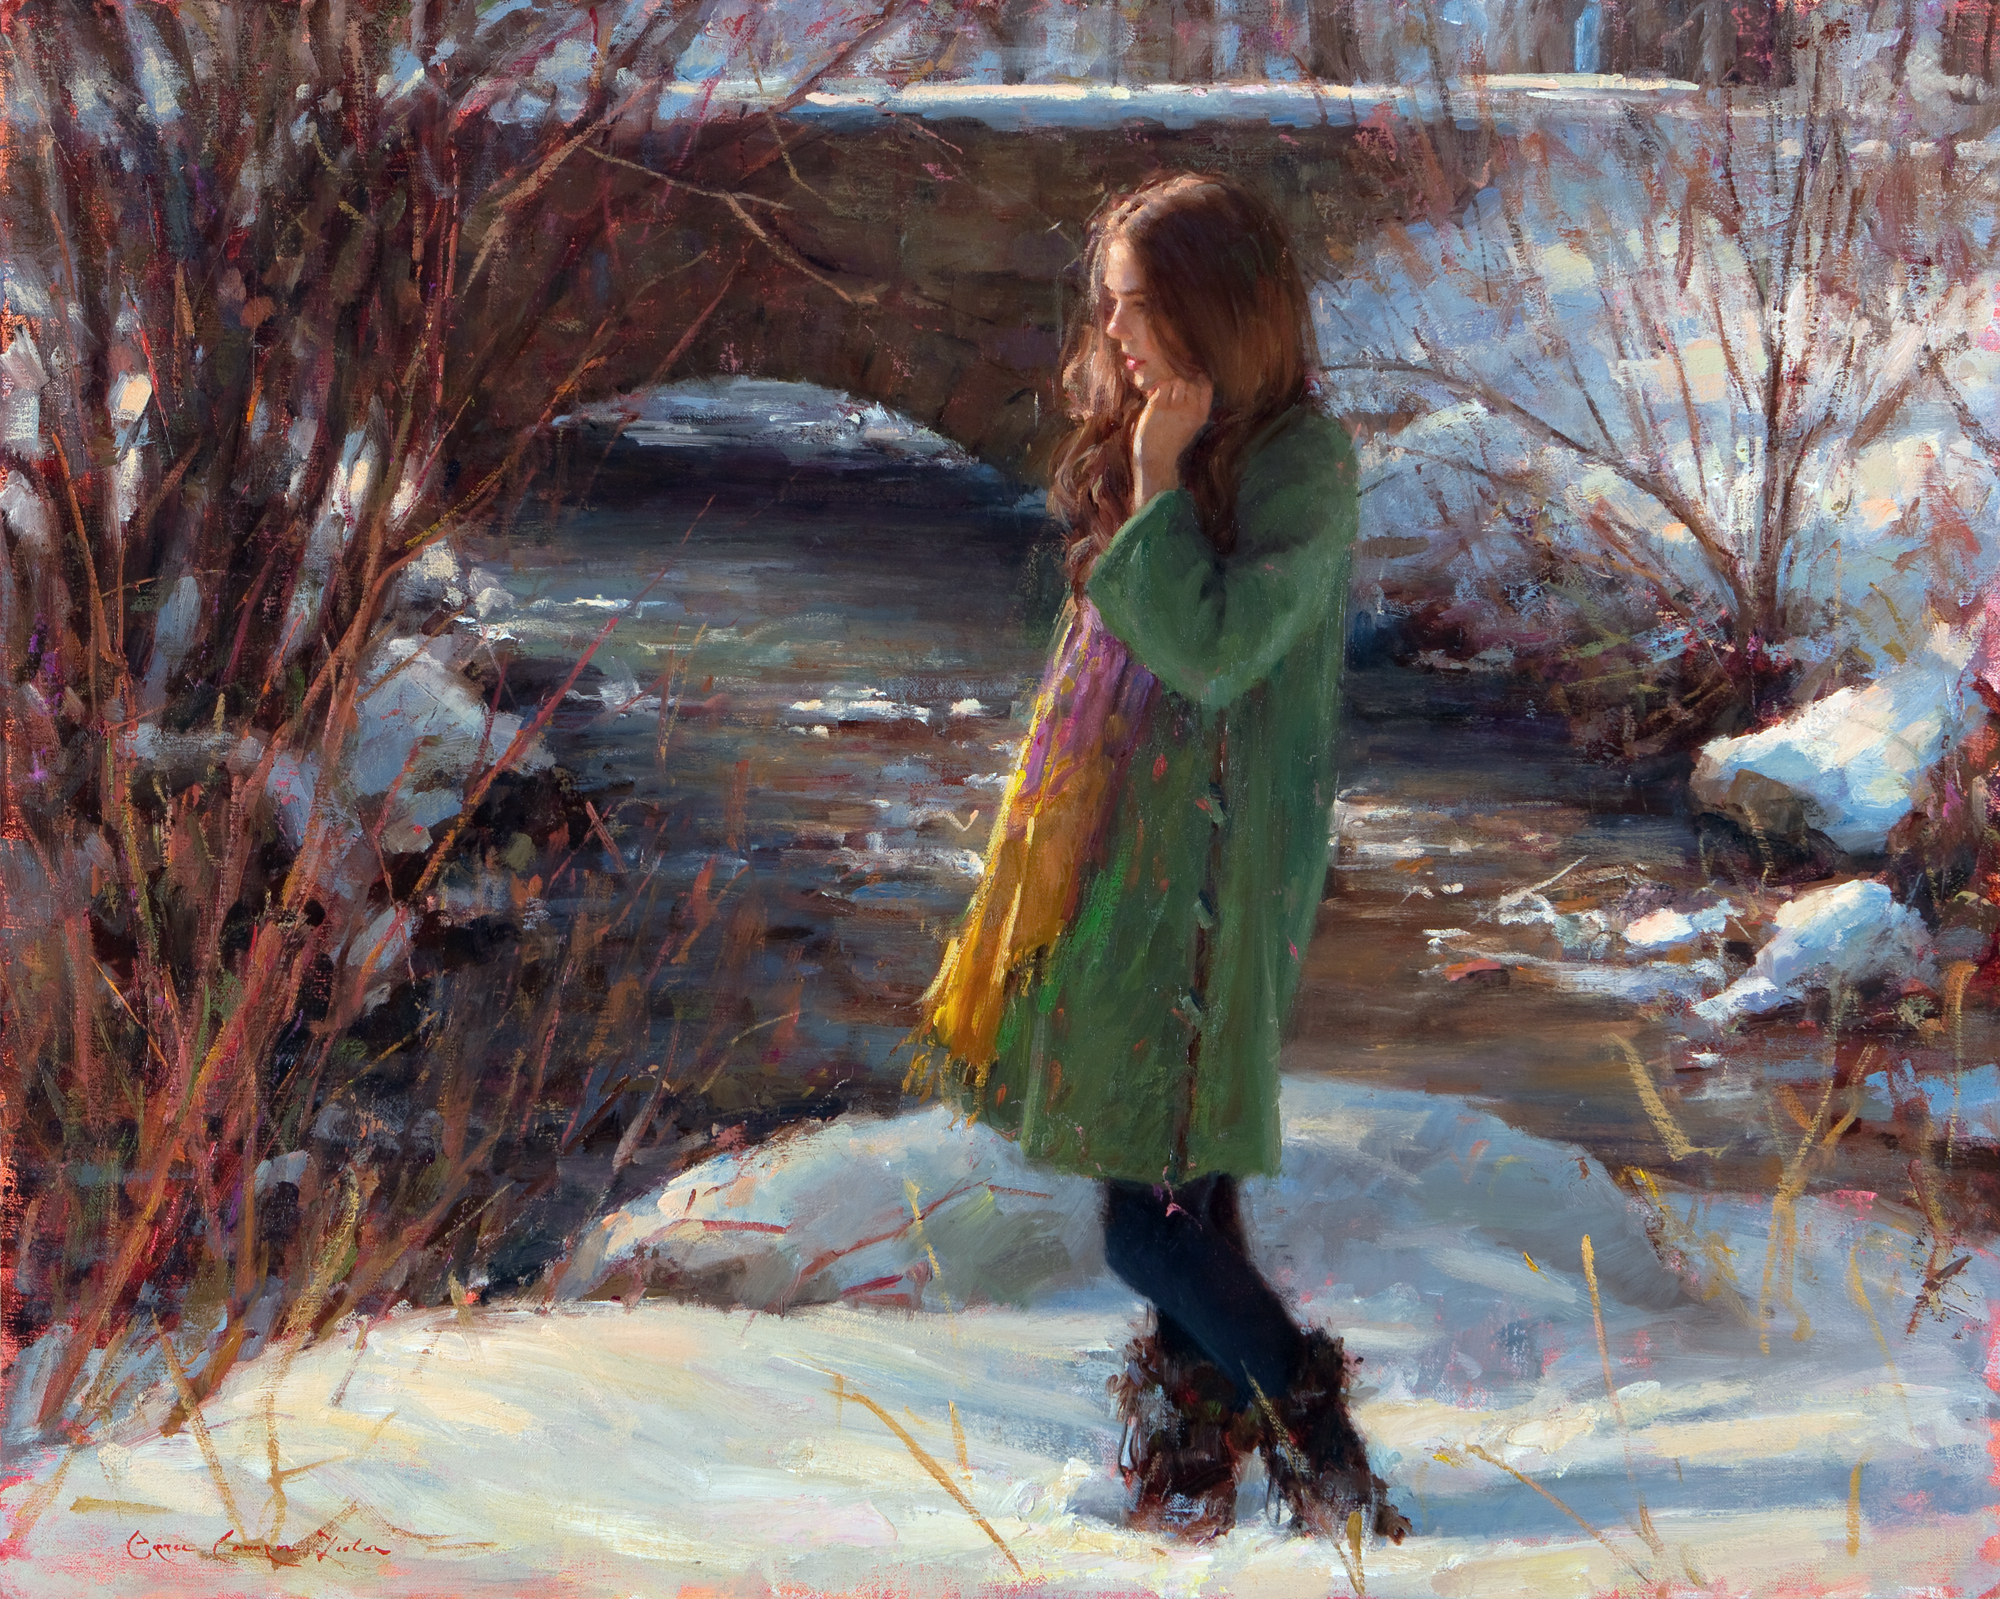 Bryce Cameron Liston, "A Winter’s Tale," 24 x 30 inches, Oil on linen